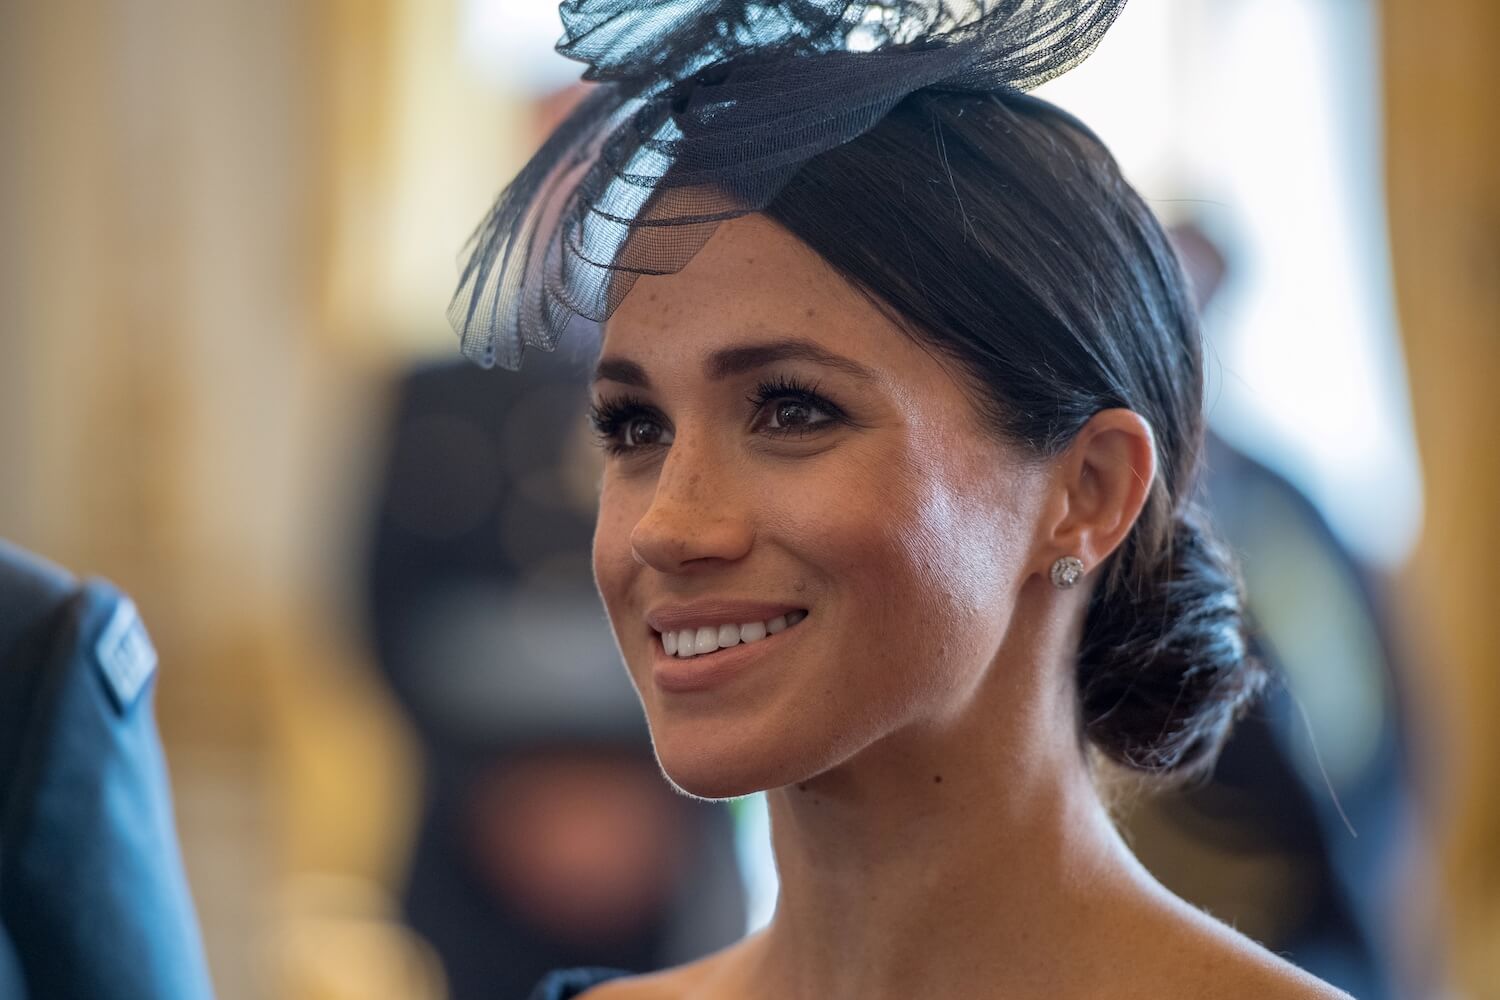 Meghan Markle Found Royal Protocol ‘Silly’ and She ‘Hated Being Controlled,’ Former Palace Aide Claims